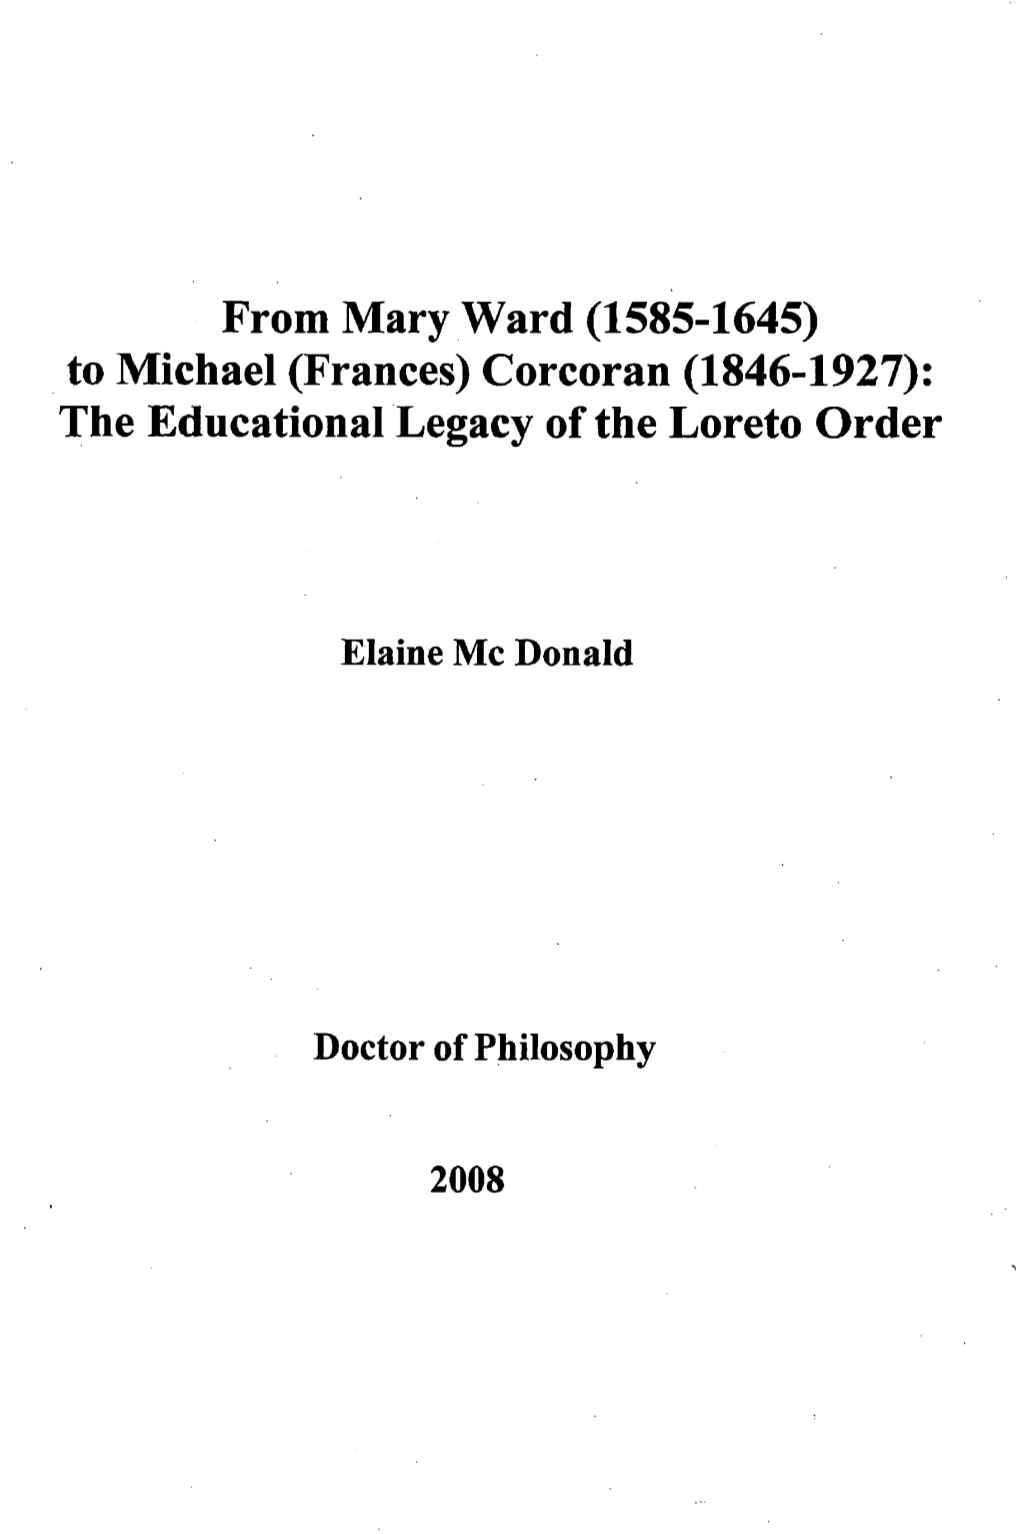 From Mary Ward (1585-1645) to Michael (Frances) Corcoran (1846-1927) • • the Educational Legacy of the Loreto Order